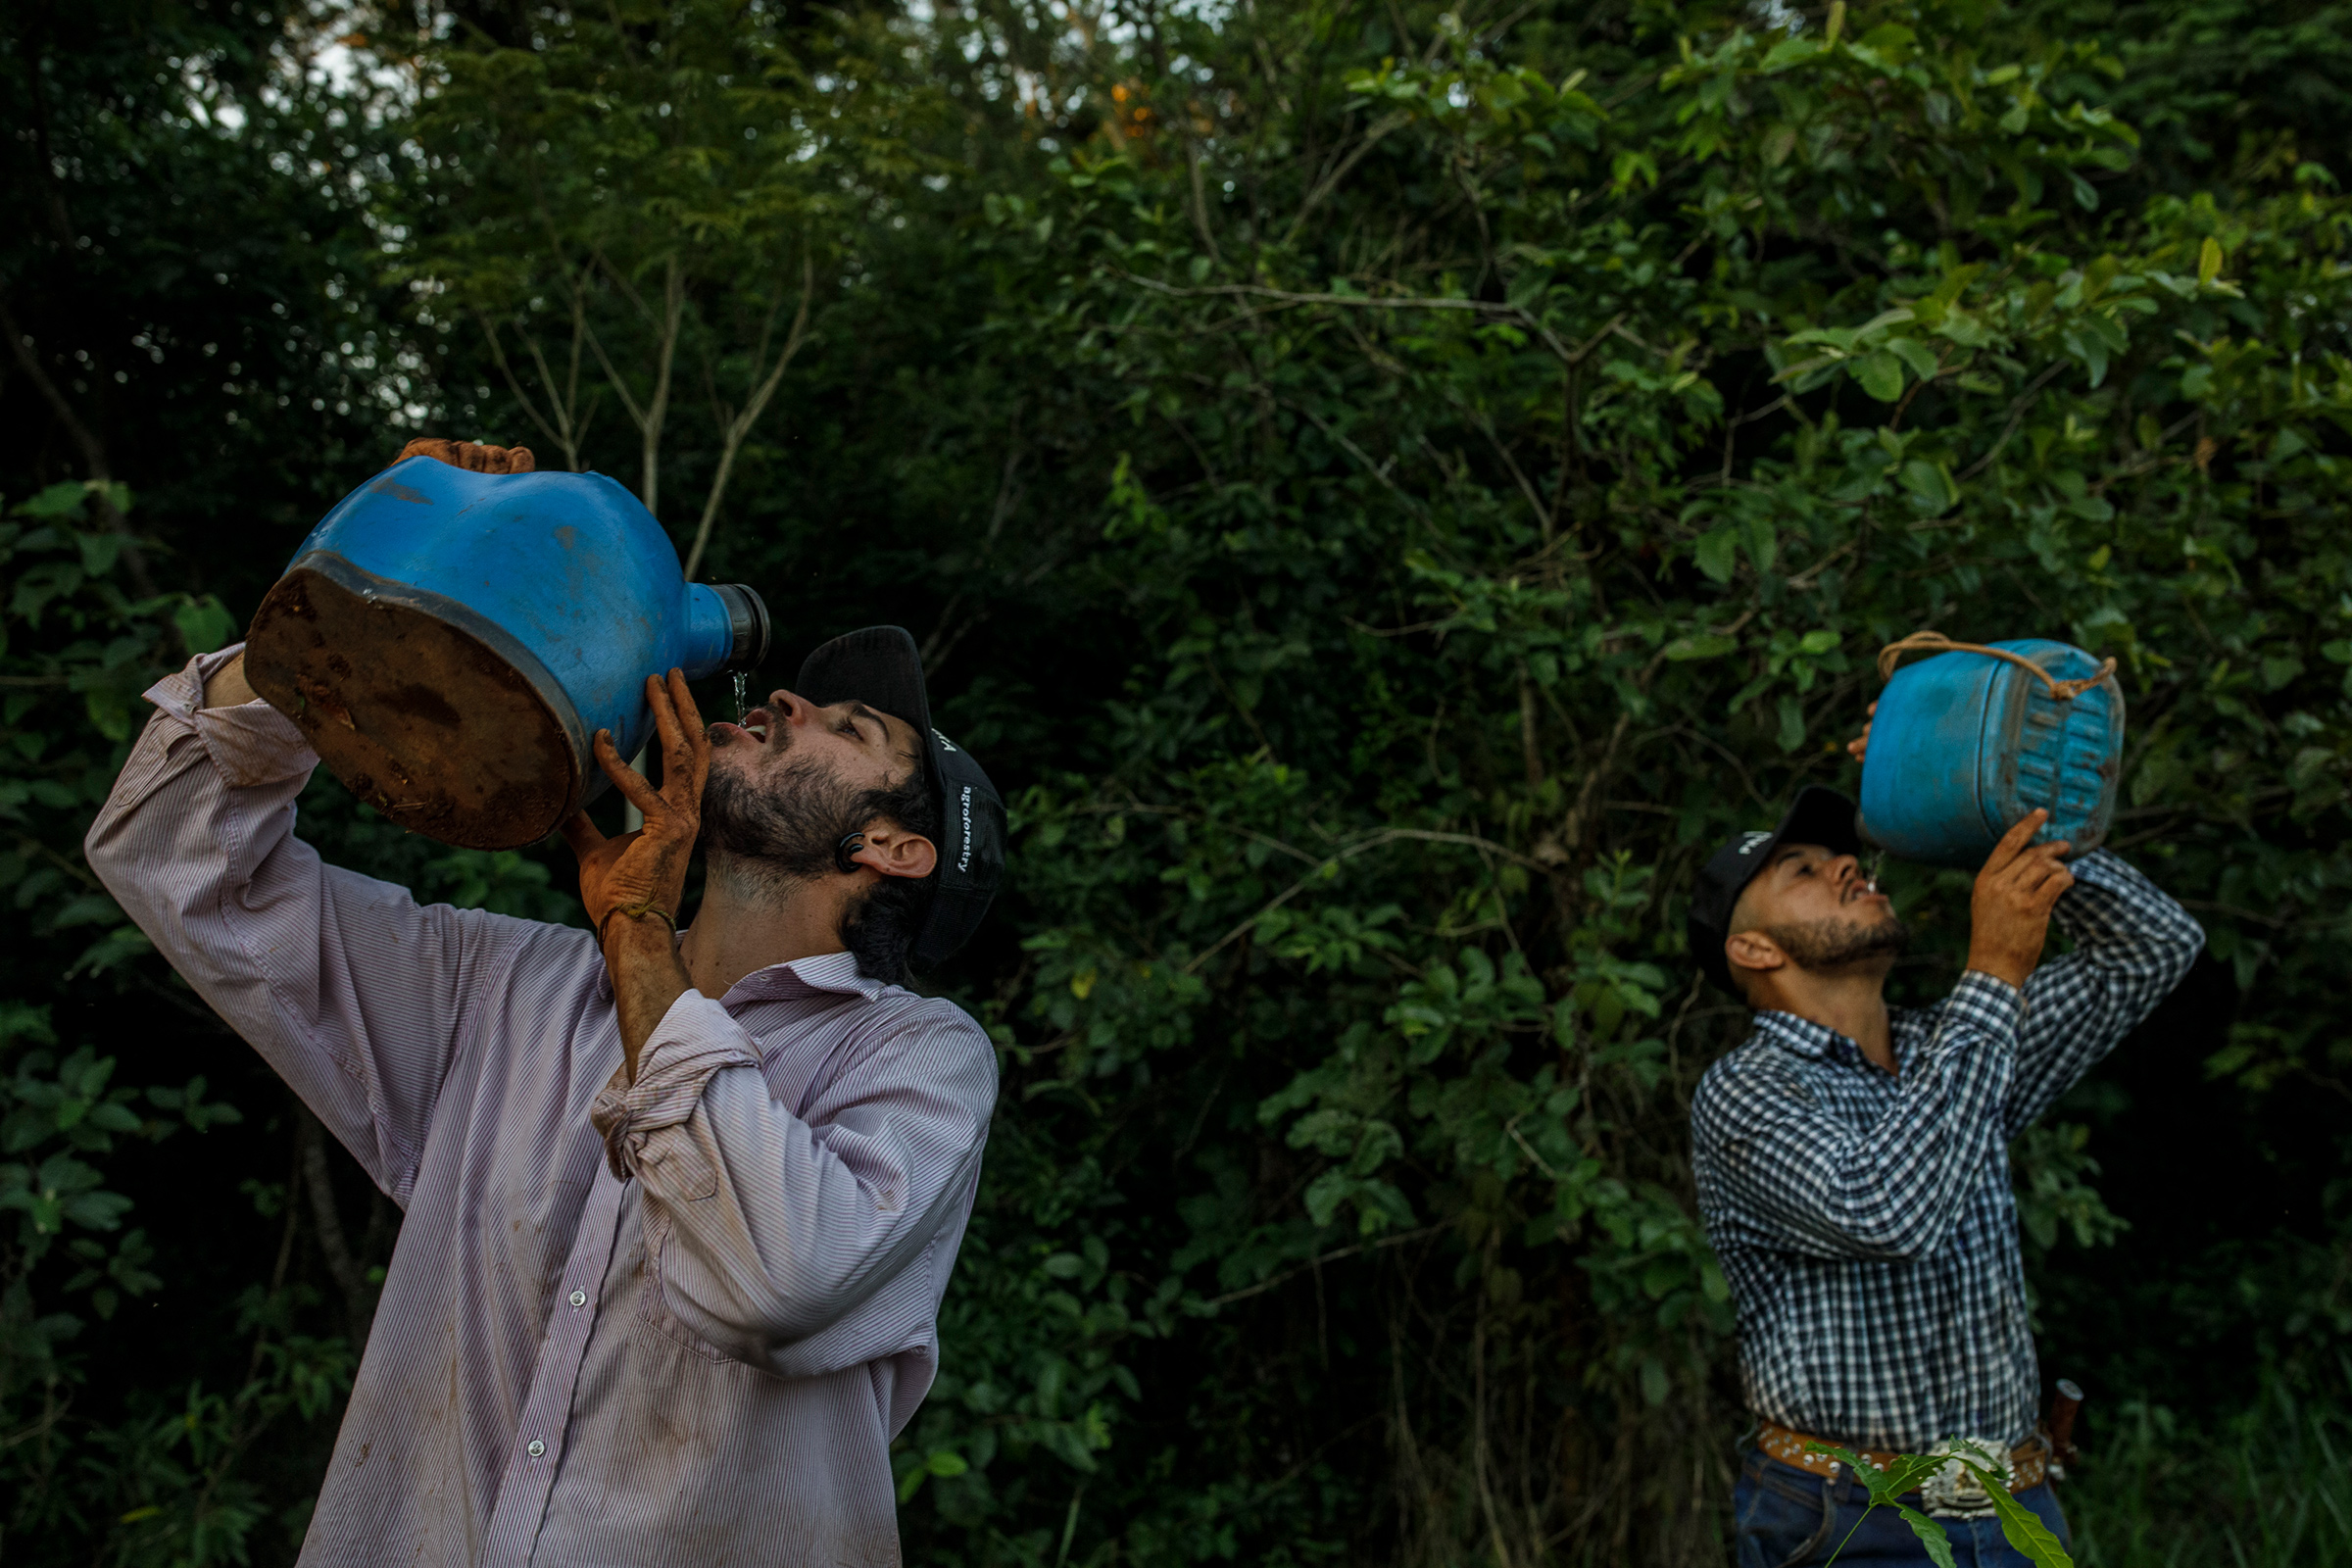 Workers drink water while planting tree seedlings in the Preta Terra project. (Victor Moriyama for TIME)